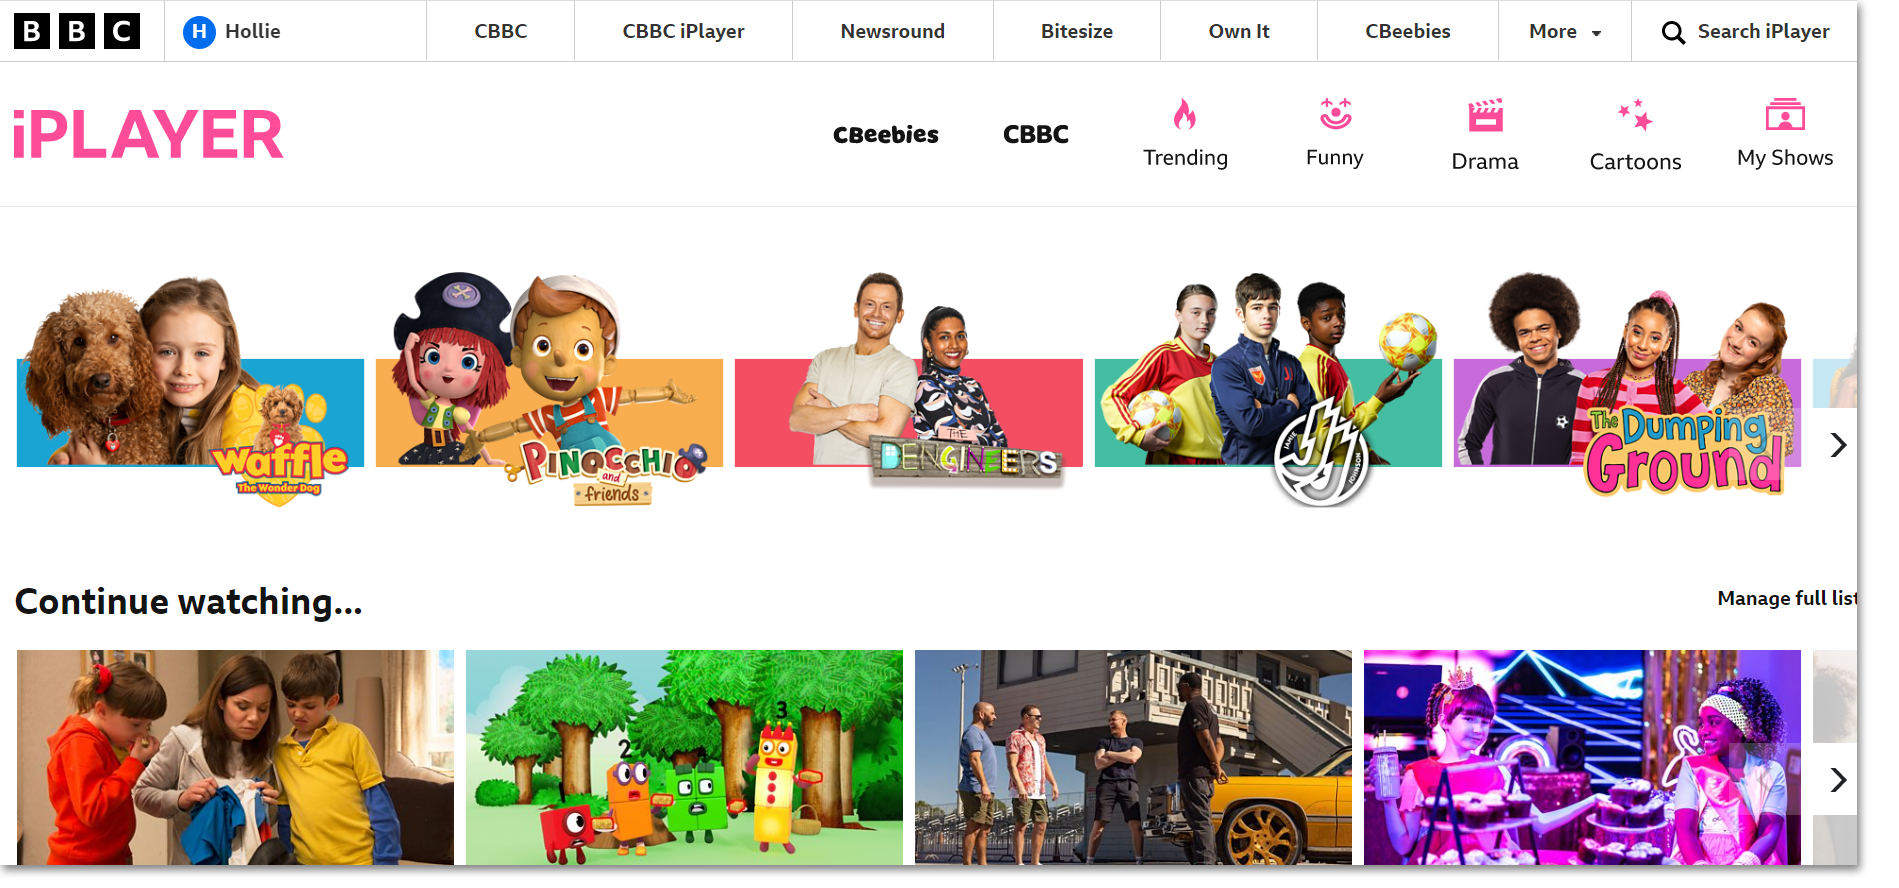 Image of the BBC iPlayer homepage when accessed by a child profile